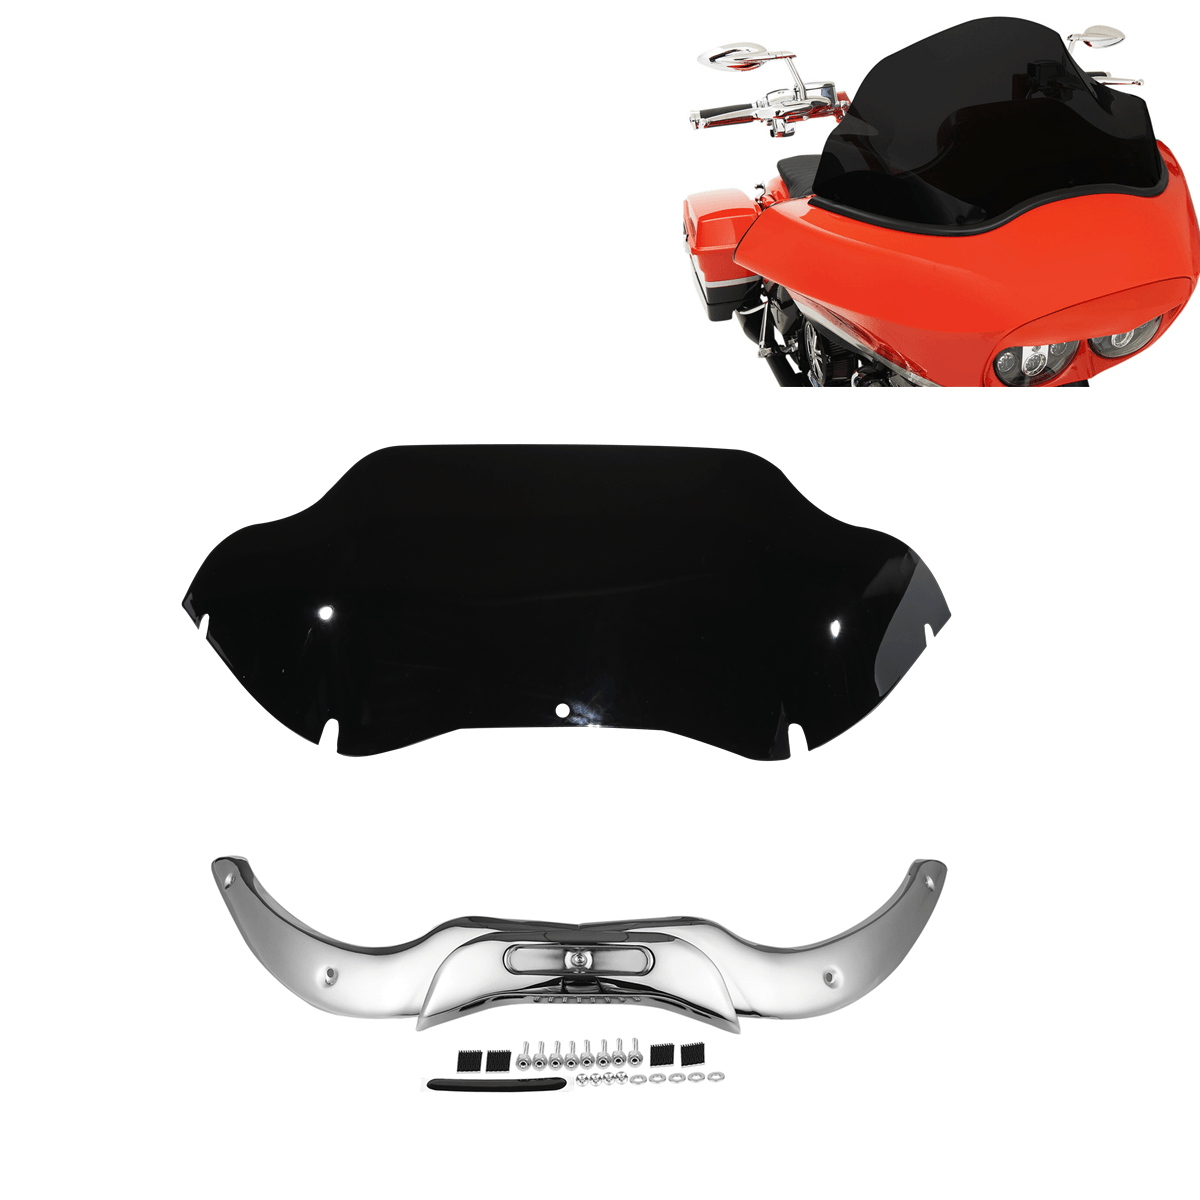 9.5" Windshield Screen W/ Chrome Trim Fit For Harley Road Glide FLTR FLTRX 04-13 - Moto Life Products